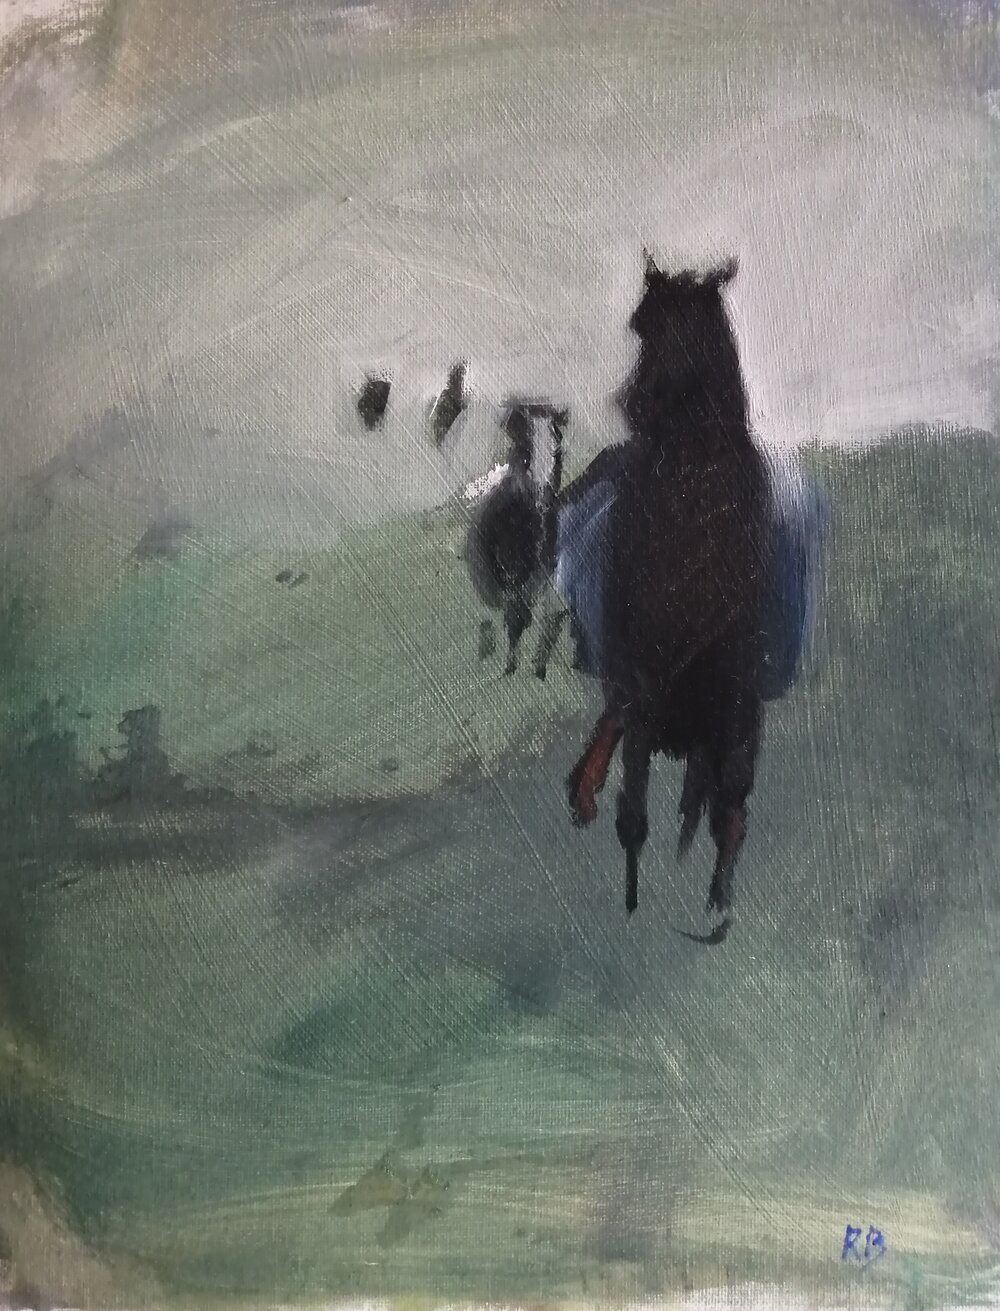  Horses  Oil on board  30x40 cms  SOLD  This dramatic sketch of horses galloping towards the viewer is striking, expressing speed, depth and perspective. 